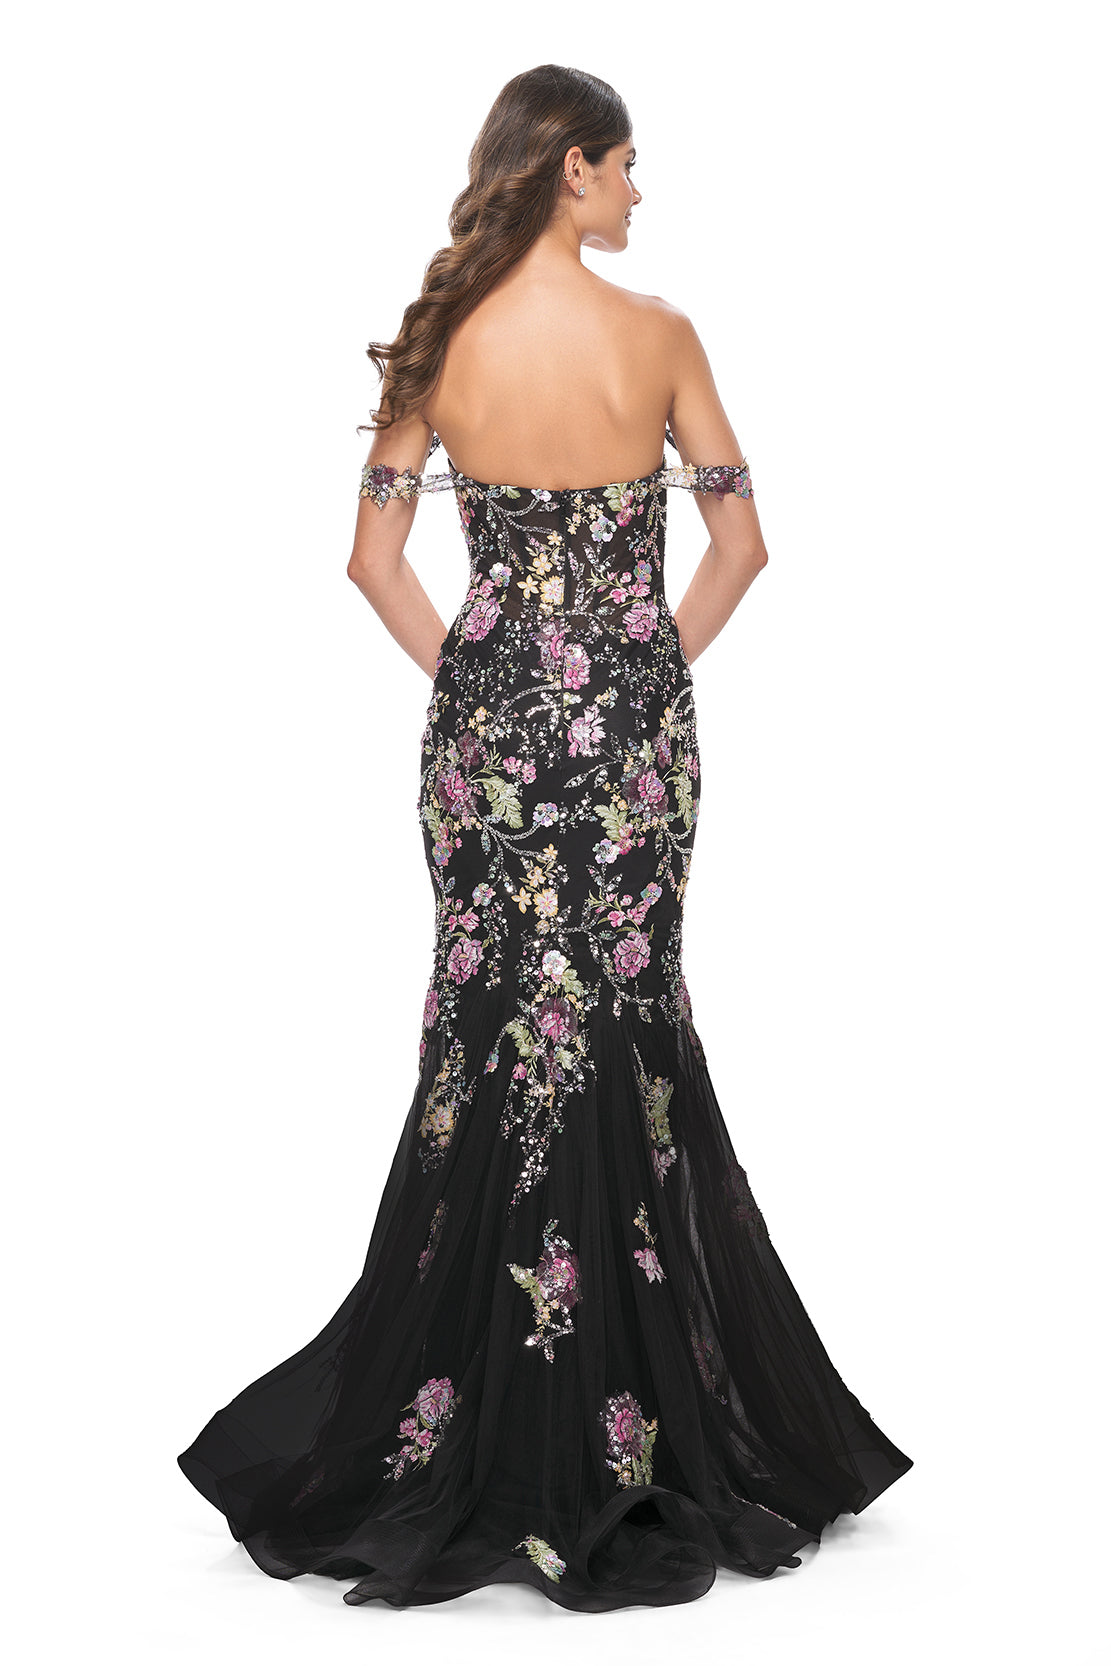 La Femme 32087 - An enchanting off-the-shoulder sequin mermaid gown with multi-color floral lace detailing, perfect for a glamorous and magical look.